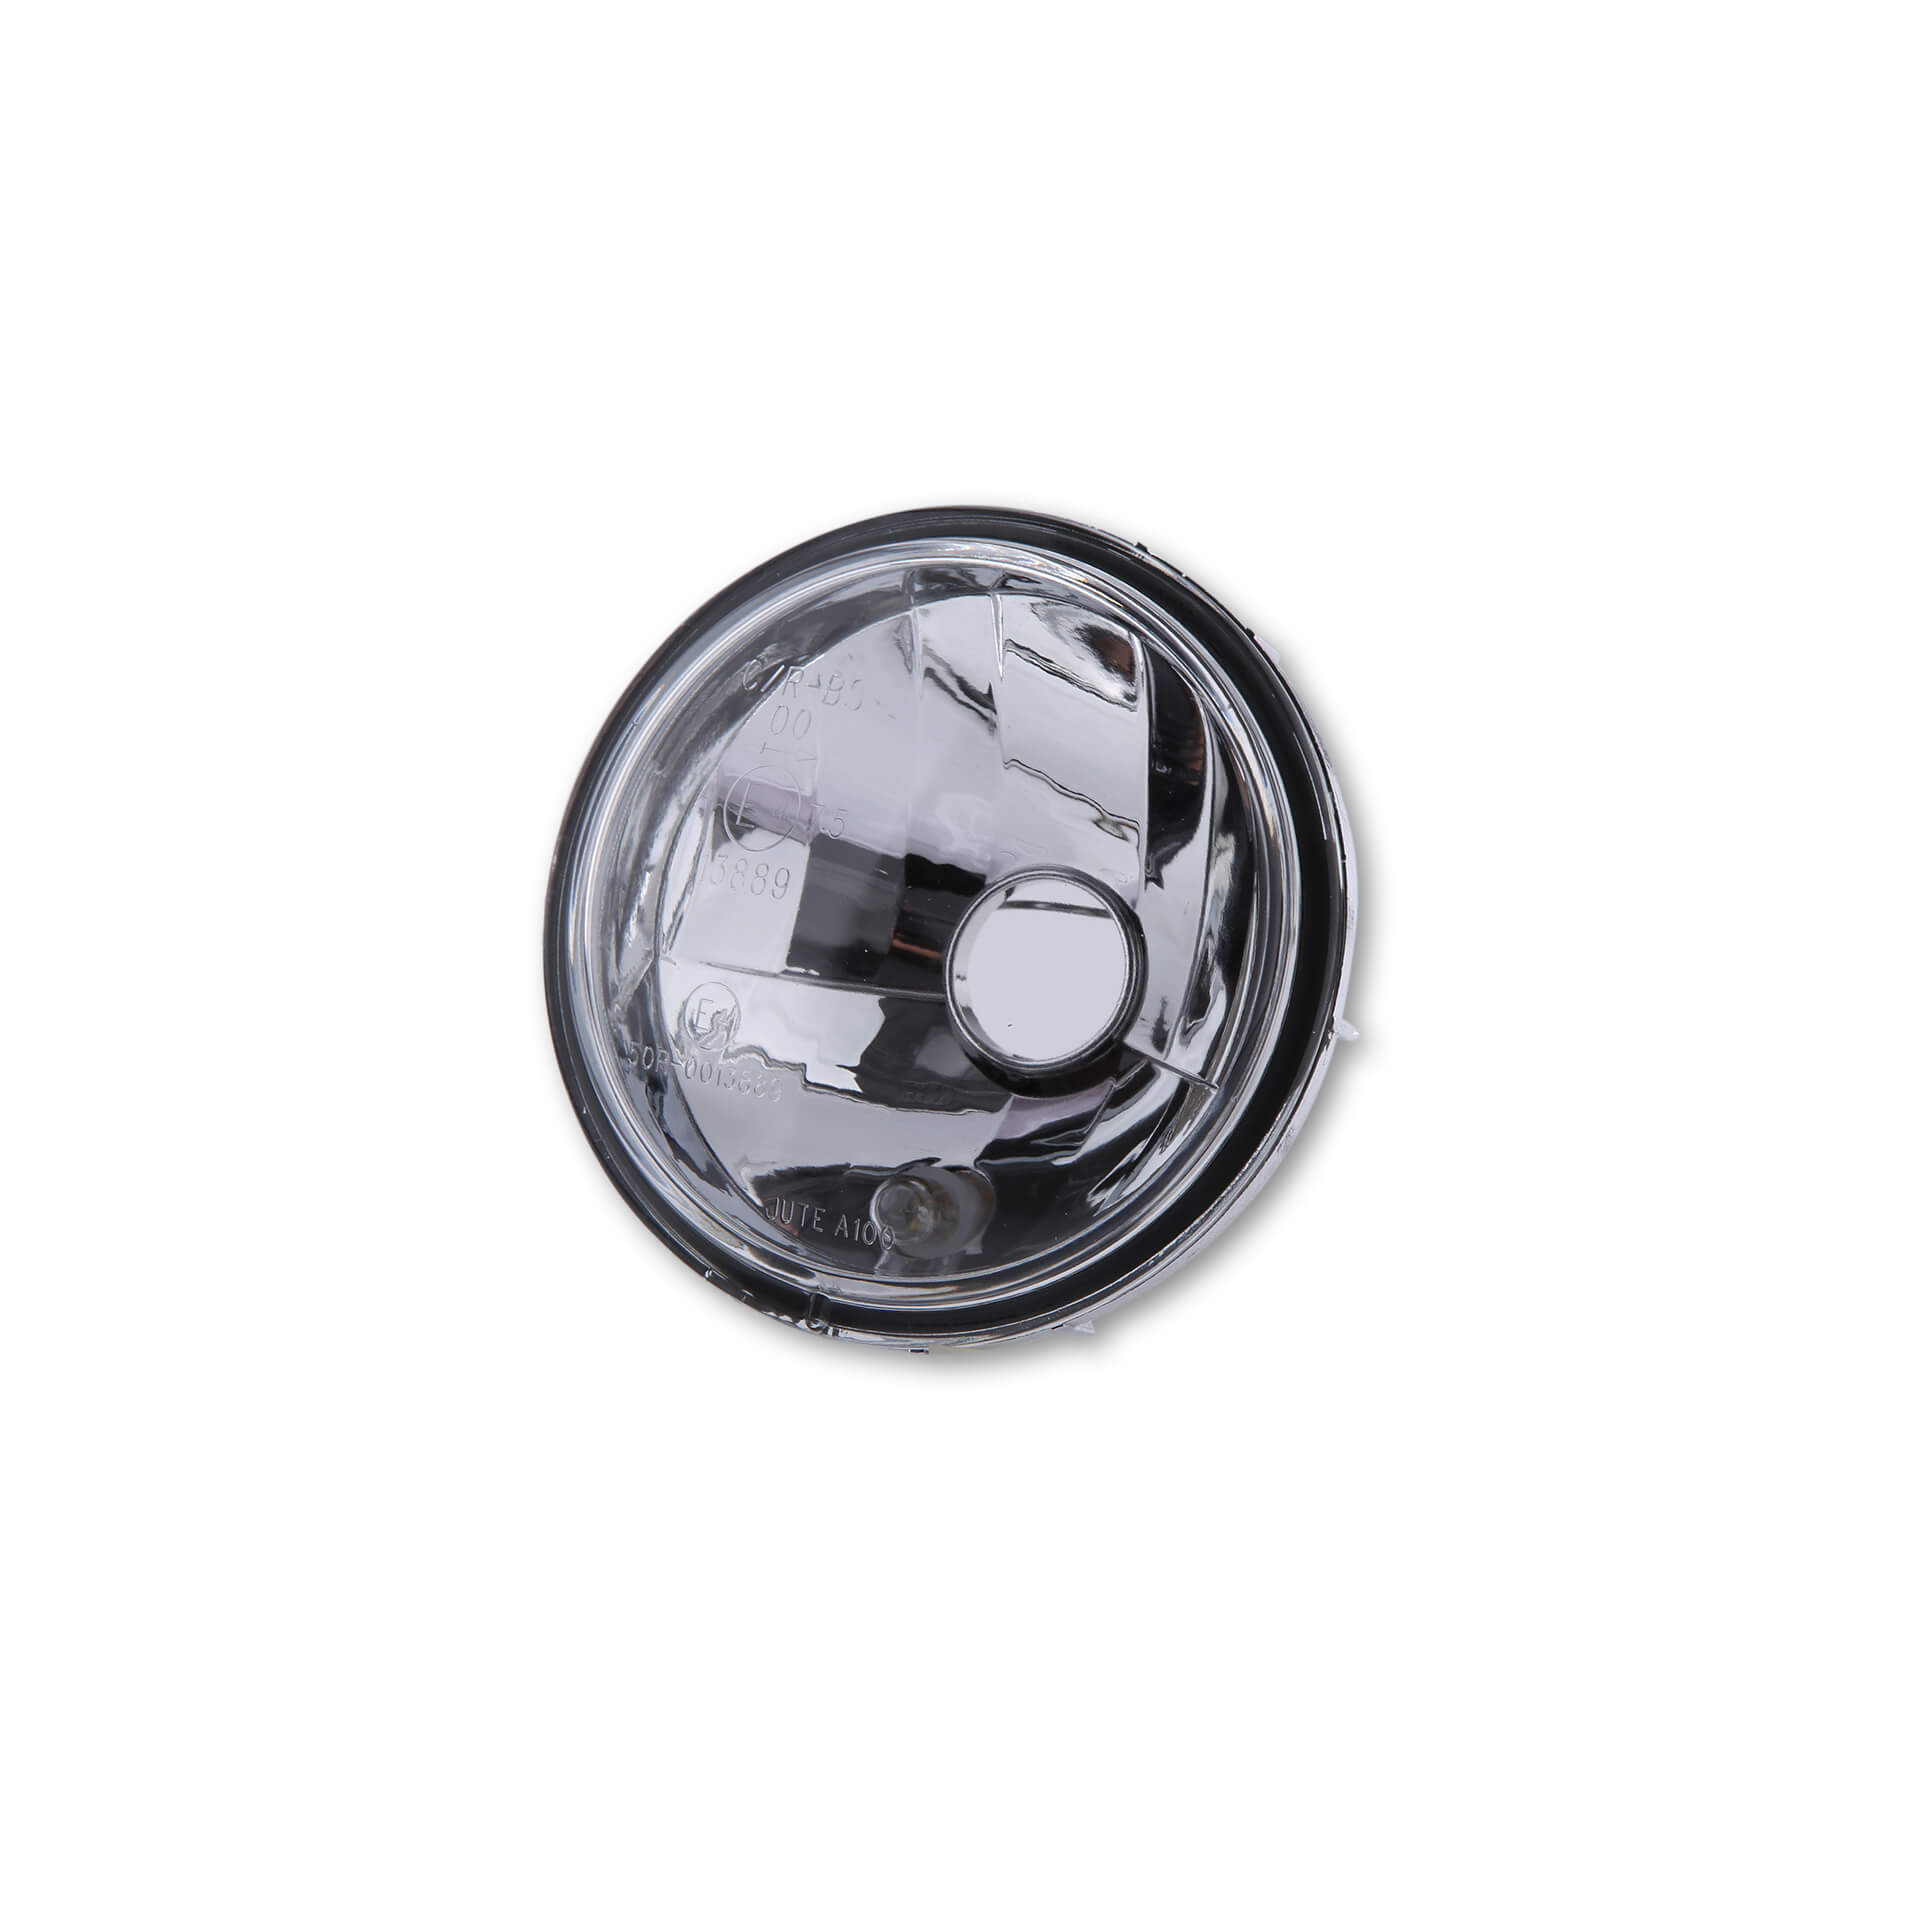 shin_yo Headlight insert with parking light, 100 mm, for HS1 35/35W, clear glass, E-marked